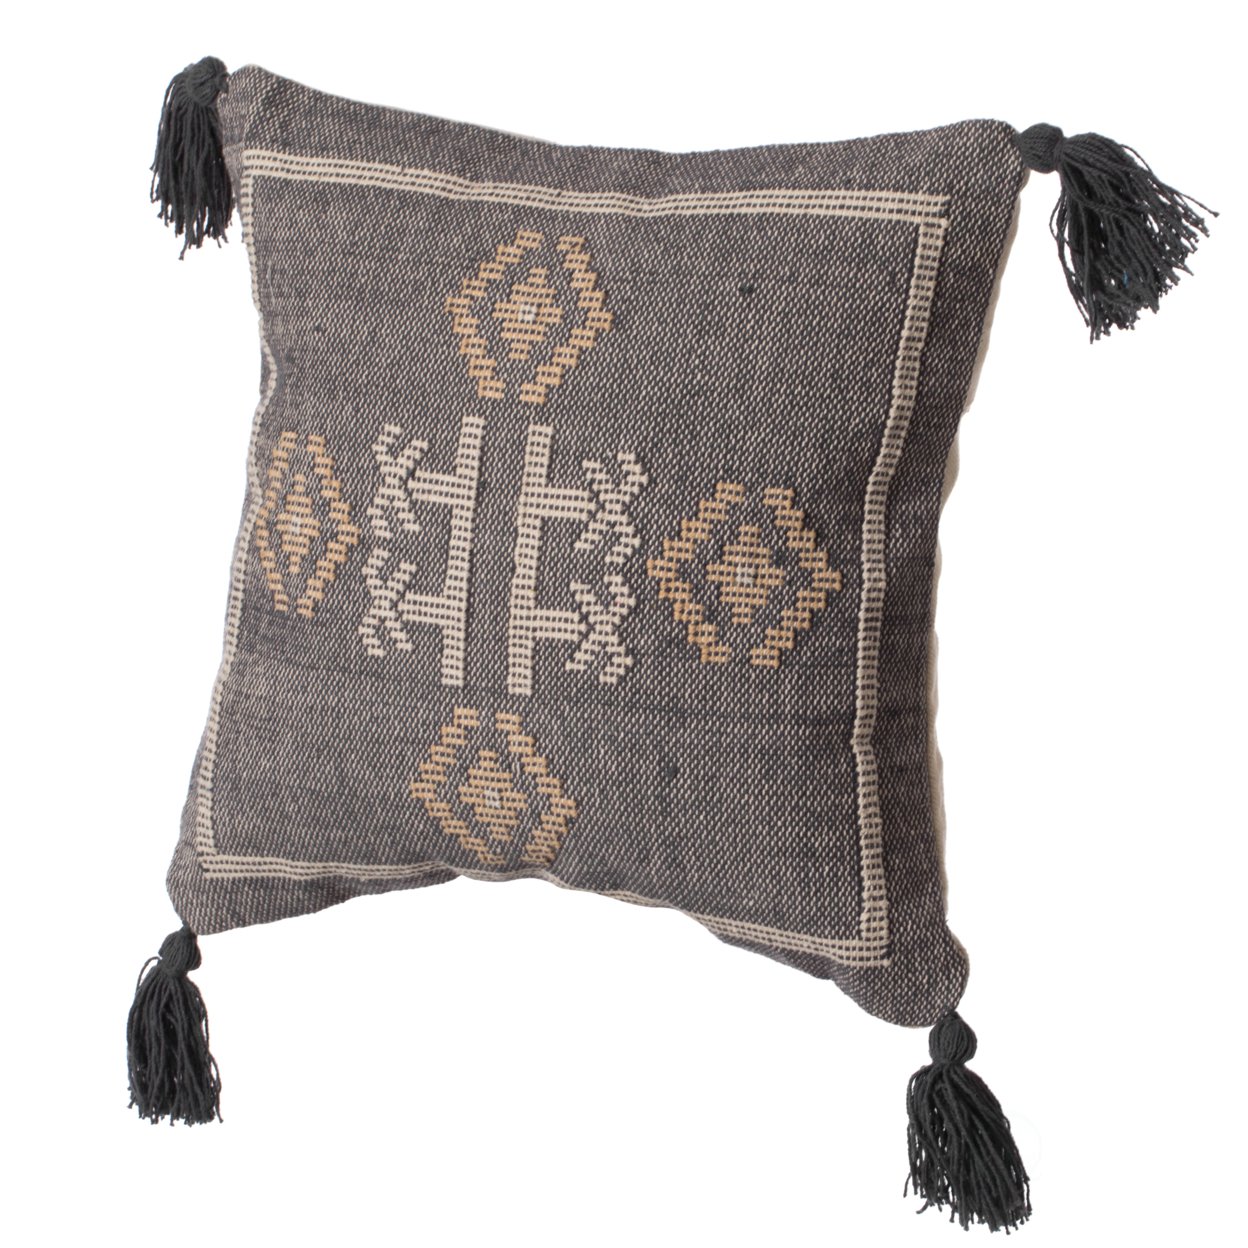 16" Handwoven Cotton Throw Pillow Cover with Tribal Aztec Design and Tassel Corners - brown with cushion